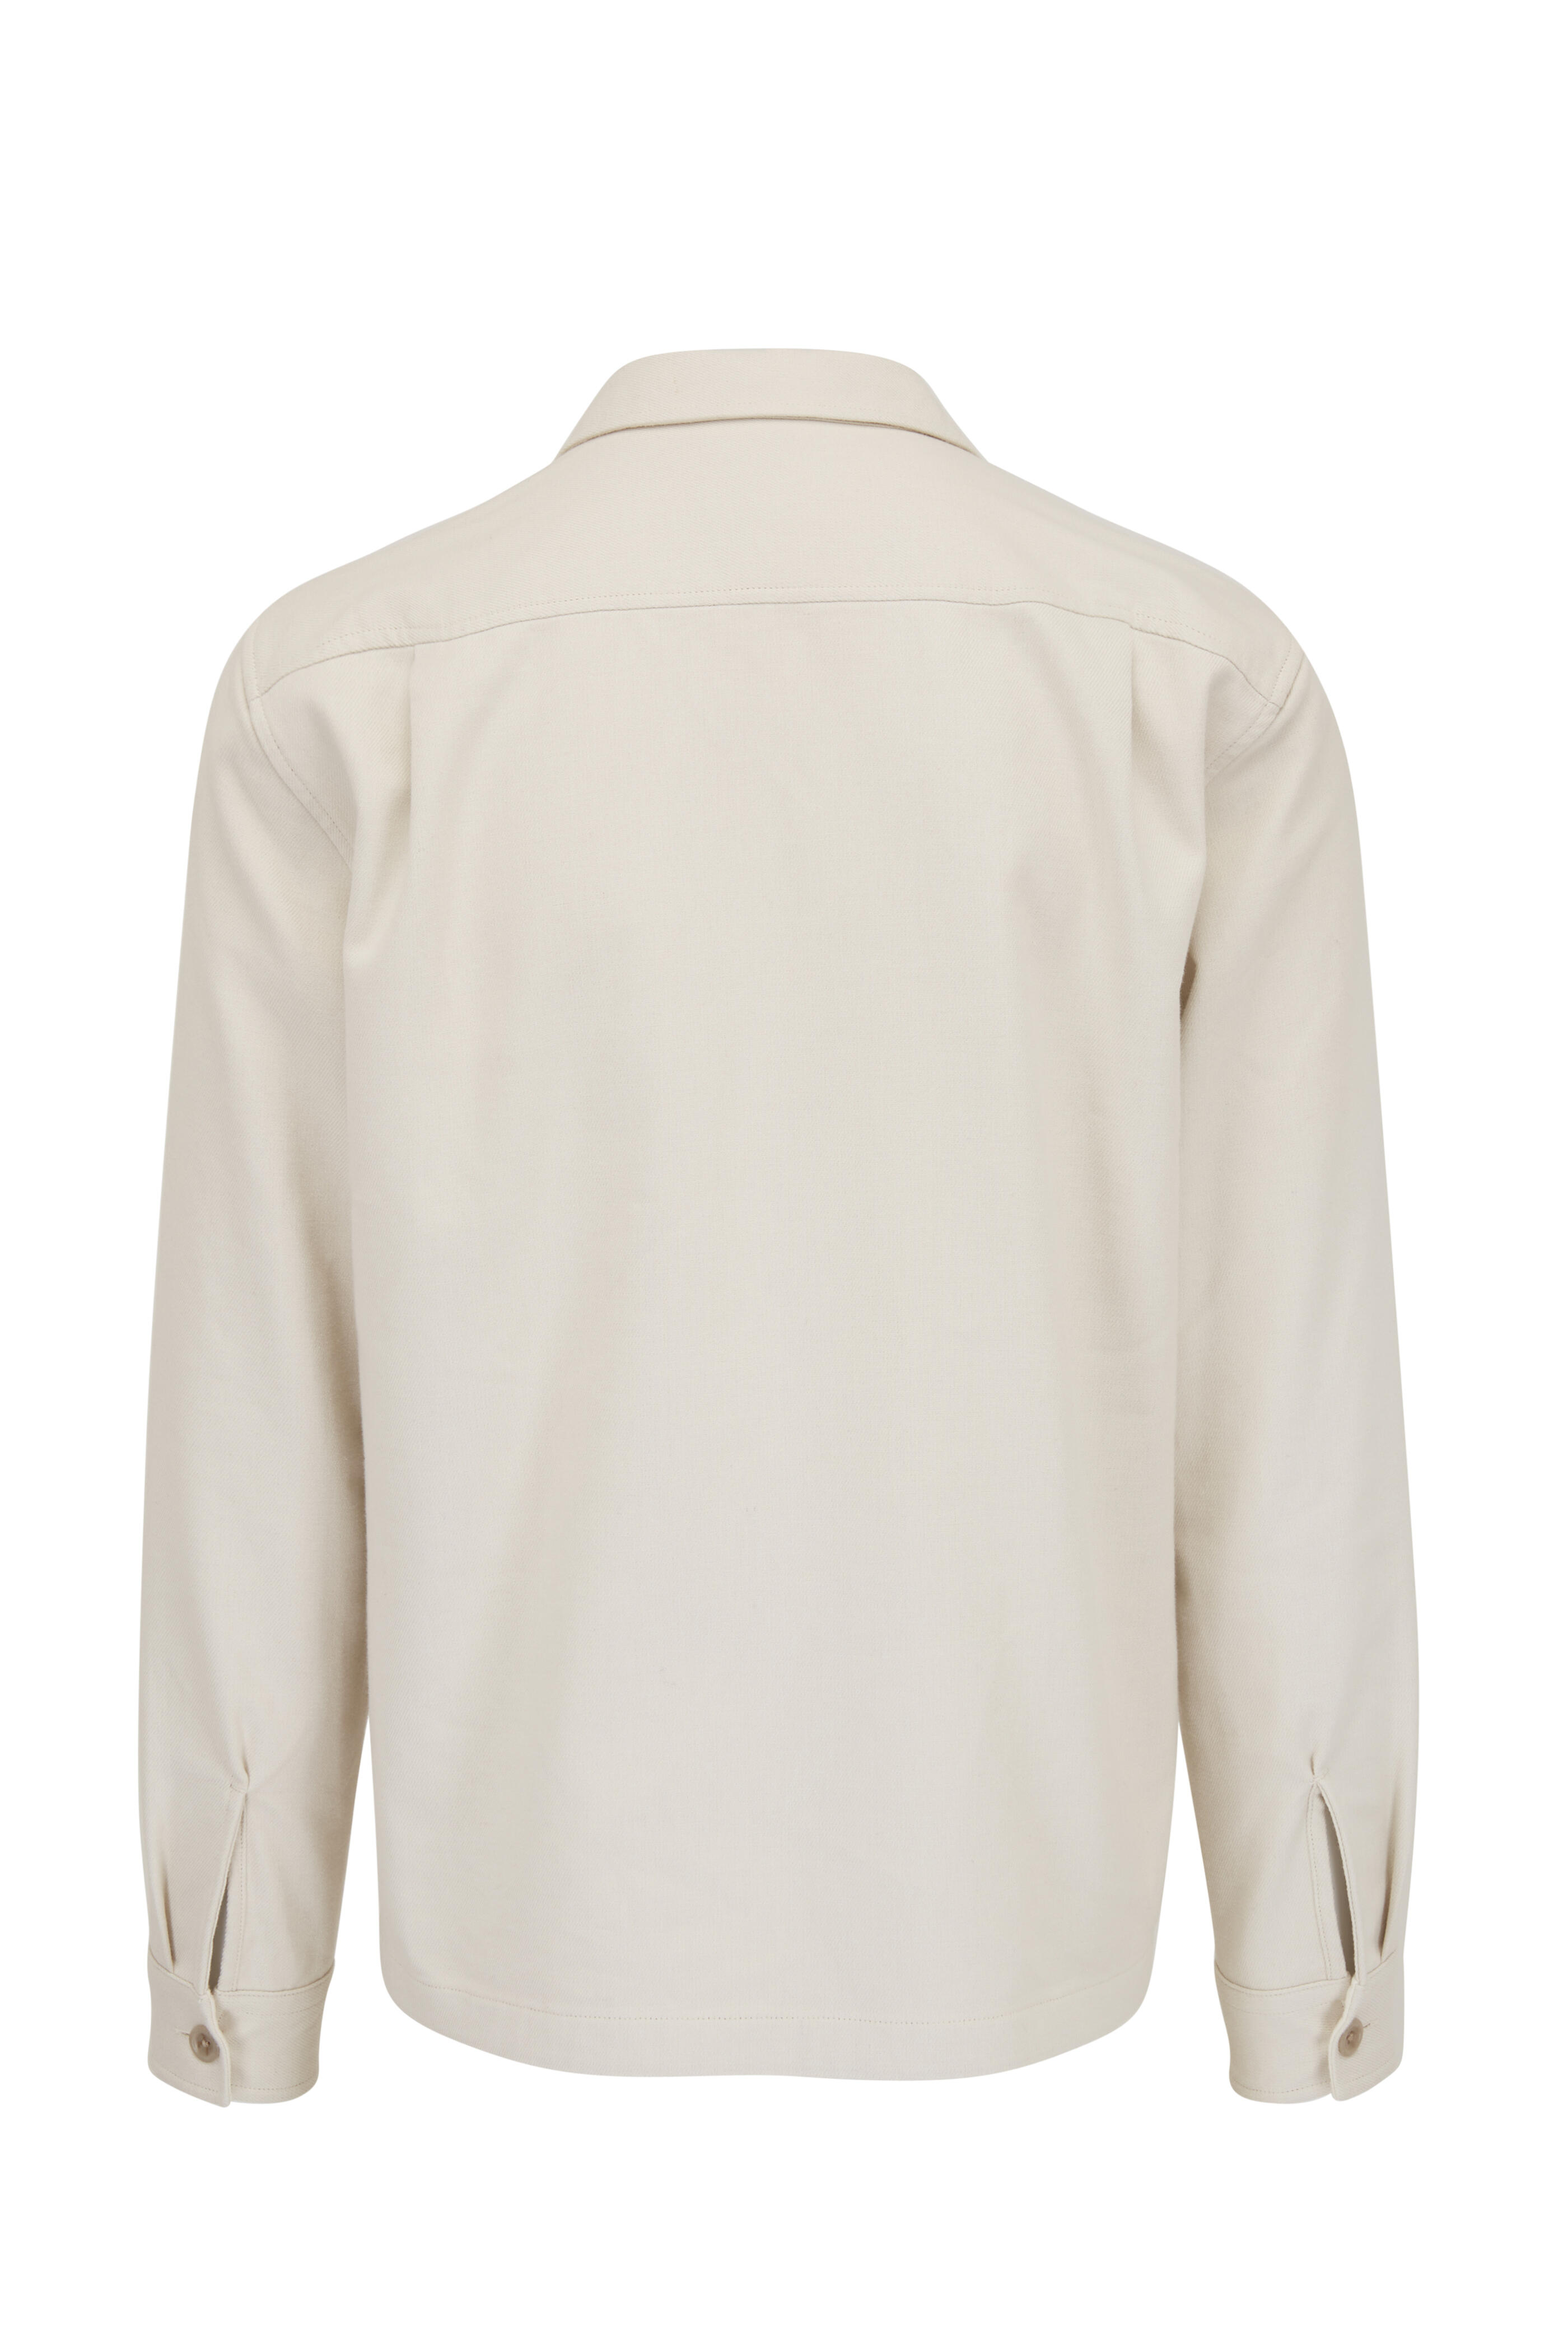 Vince - Bone Light Taupe Double-Faced Workwear Shirt